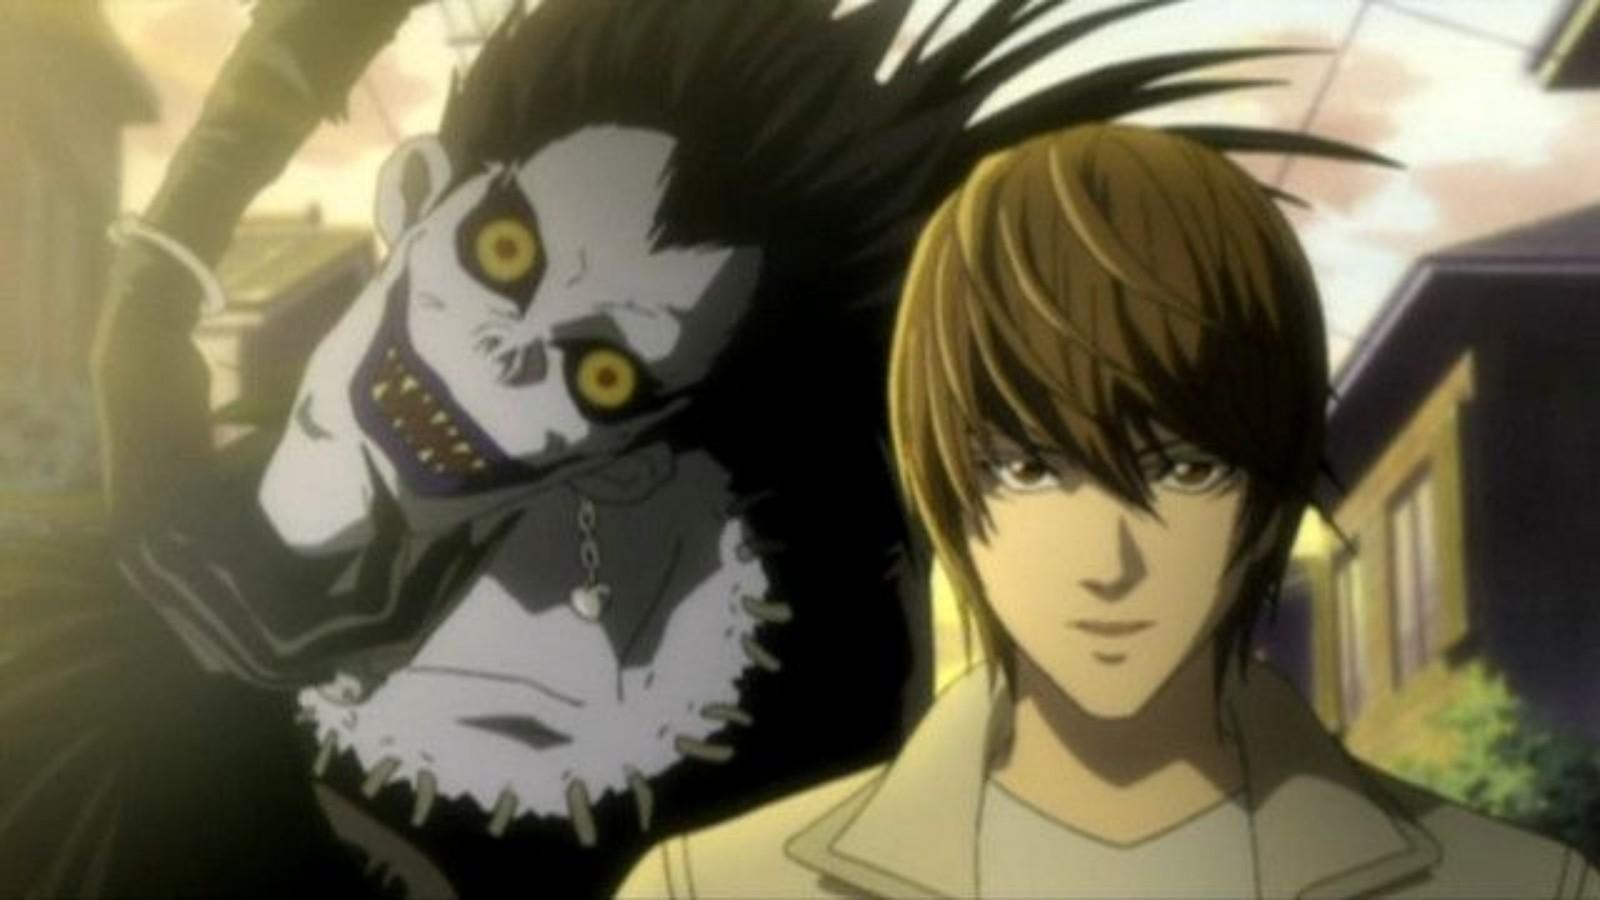 Ryuk and Light Yagami in Death Note